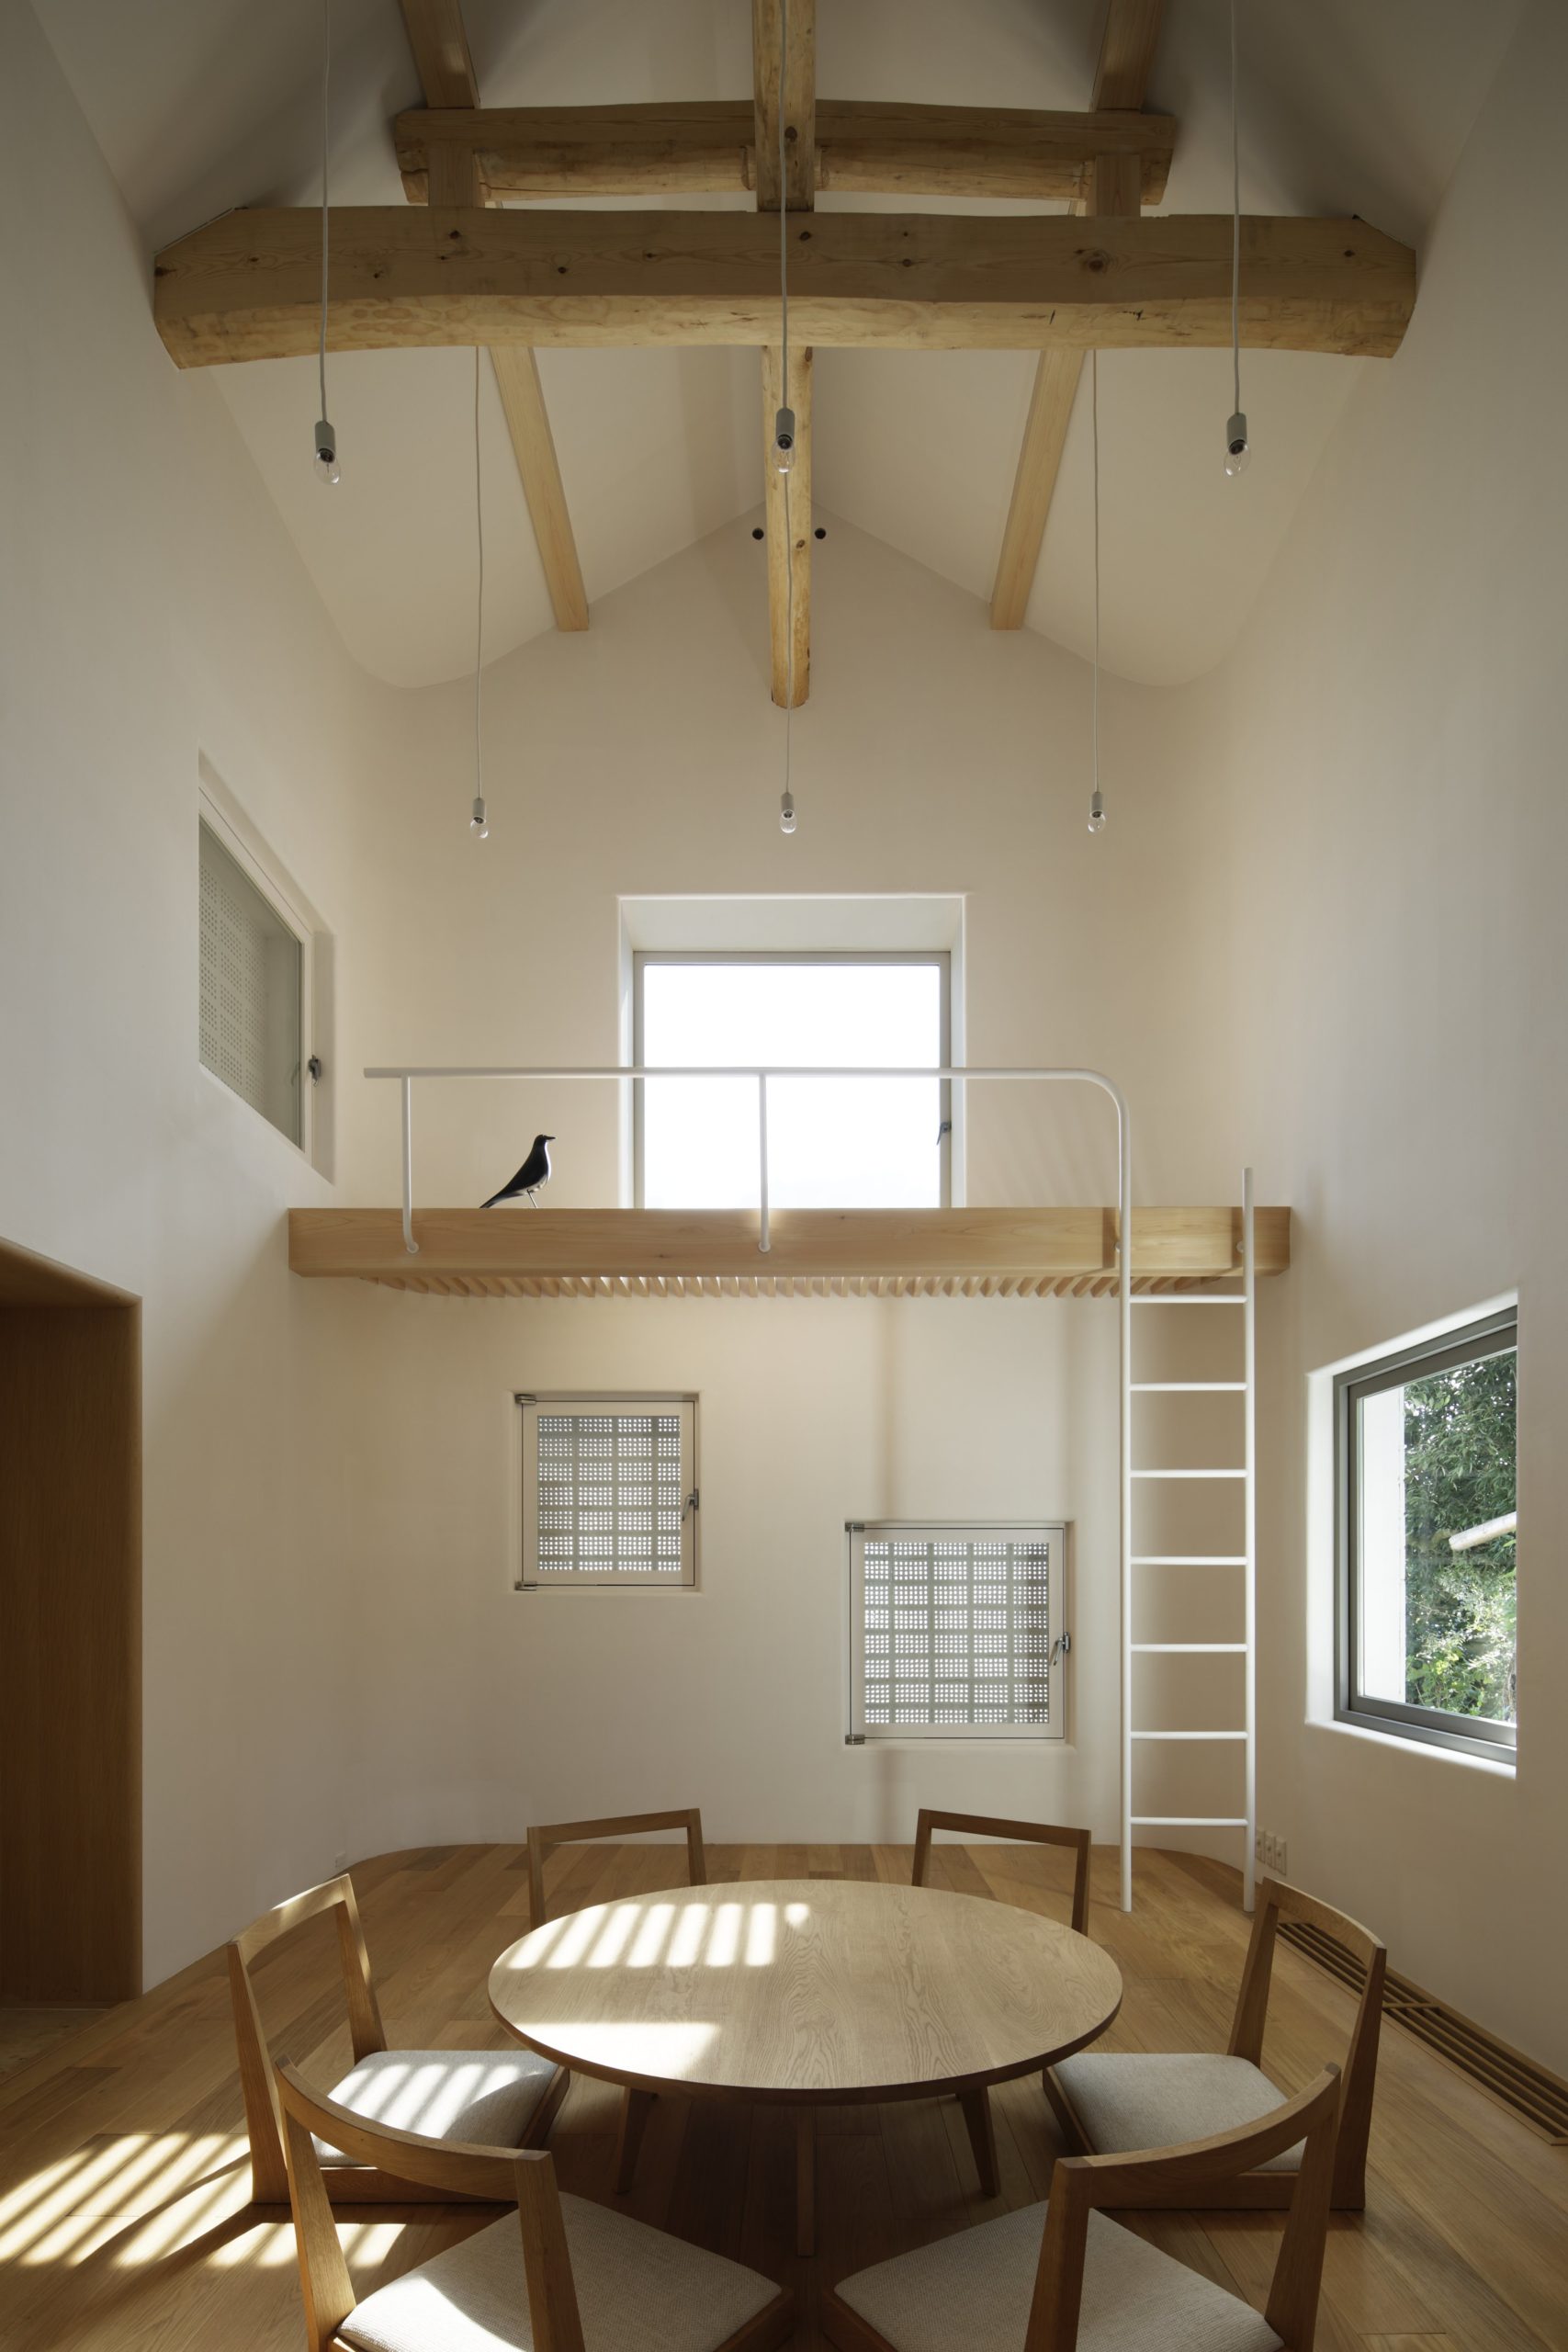 A 120-Year-Old Building Damaged In Japan’s 2011 Quake Is Reborn As This Beautiful Home